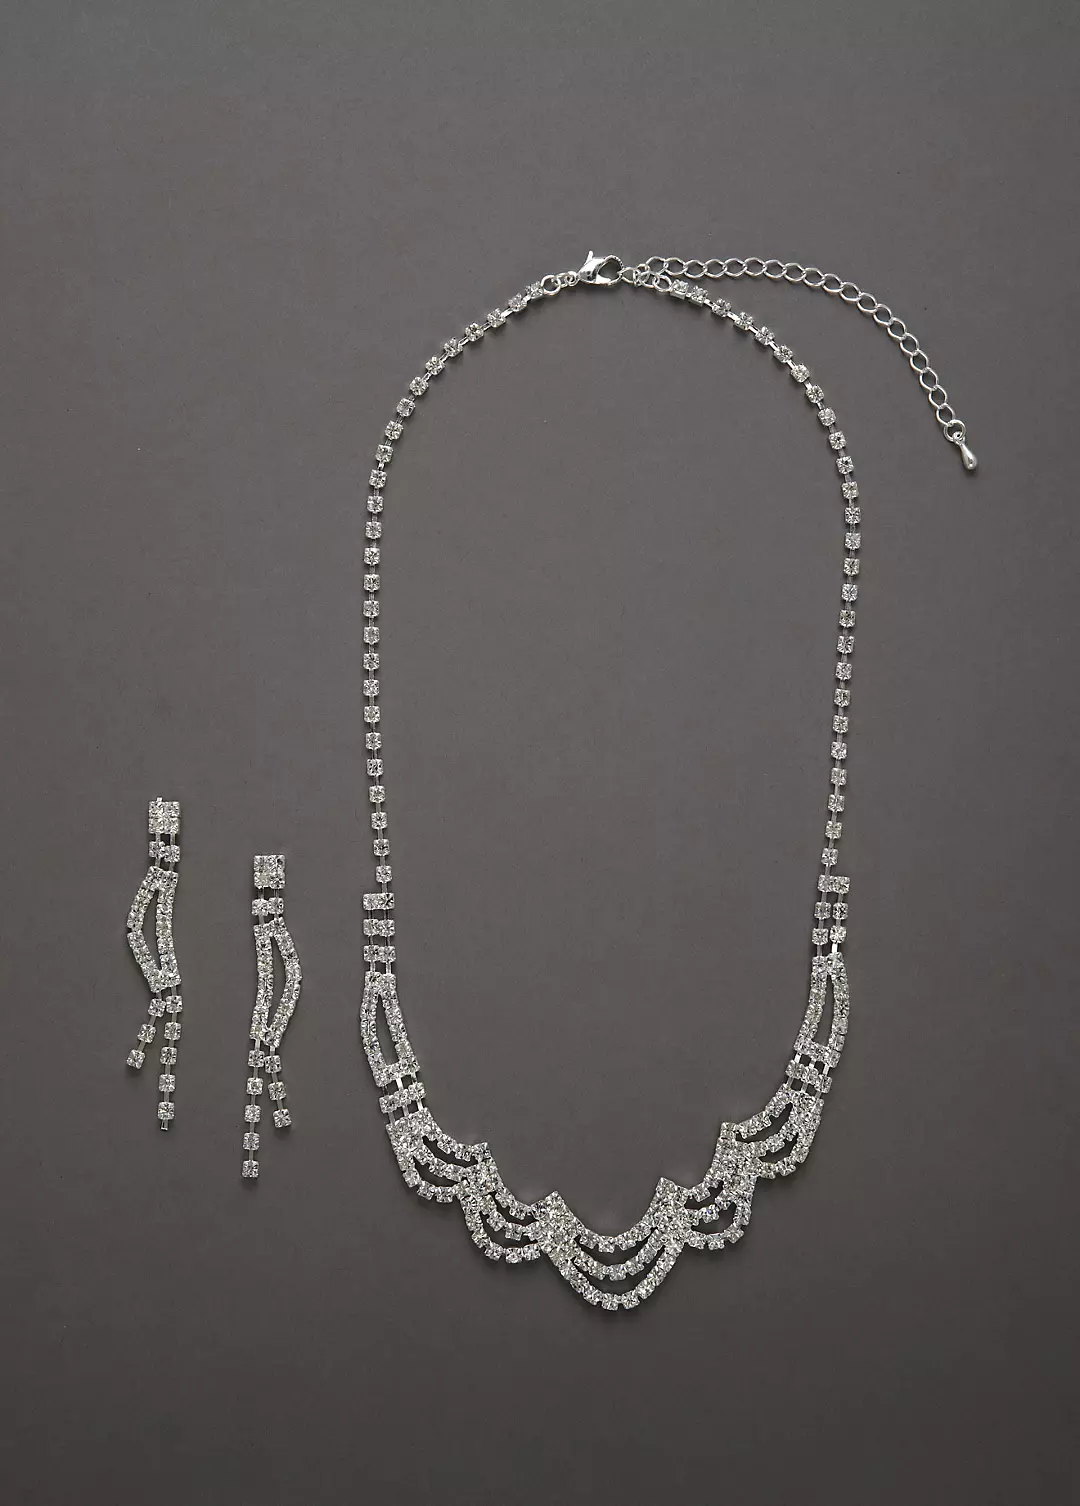 Scalloped Design Necklace and Earring Set Image